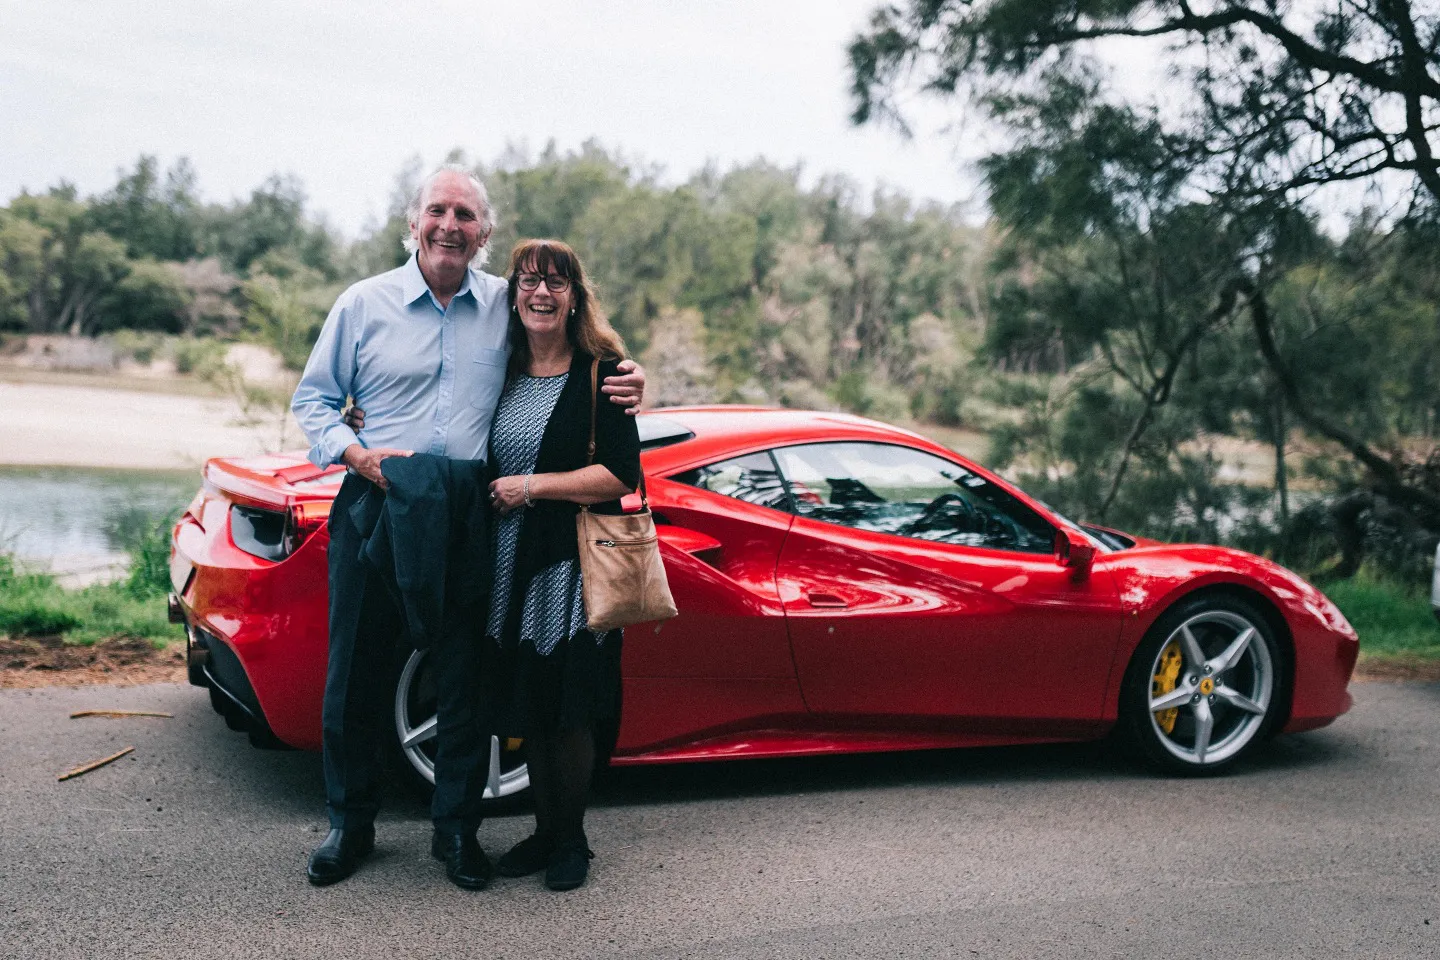 Getaway to NSW countryside on a luxury escape with supercars